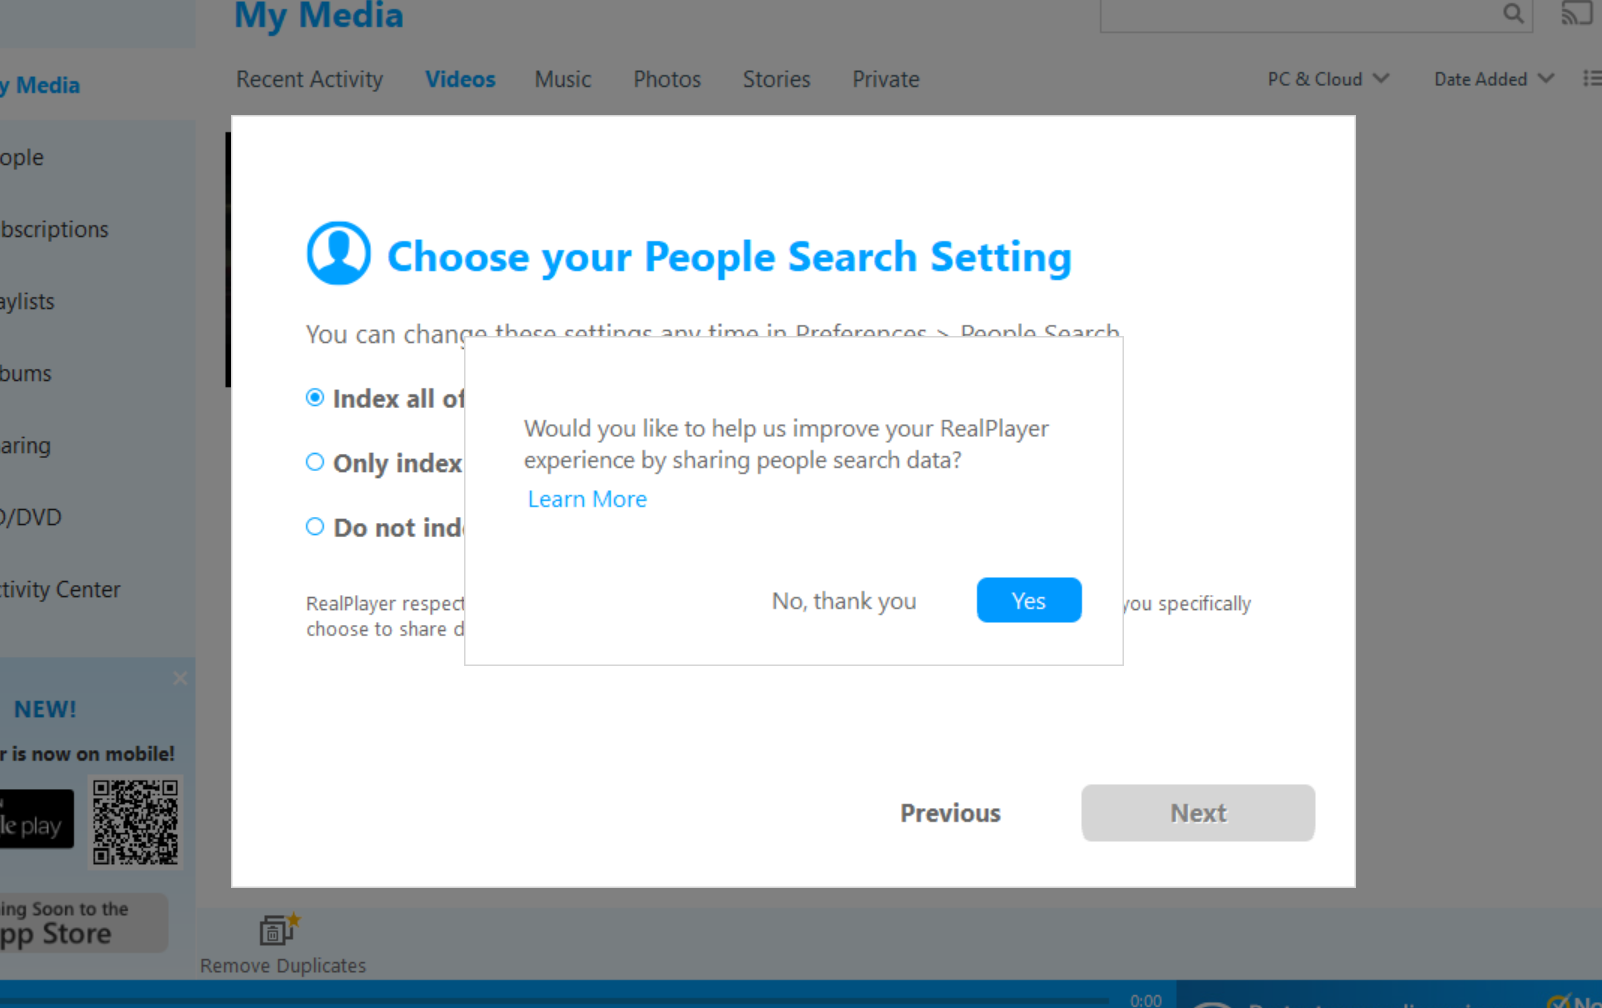 RealPlayer, asking to improve my customer experience.